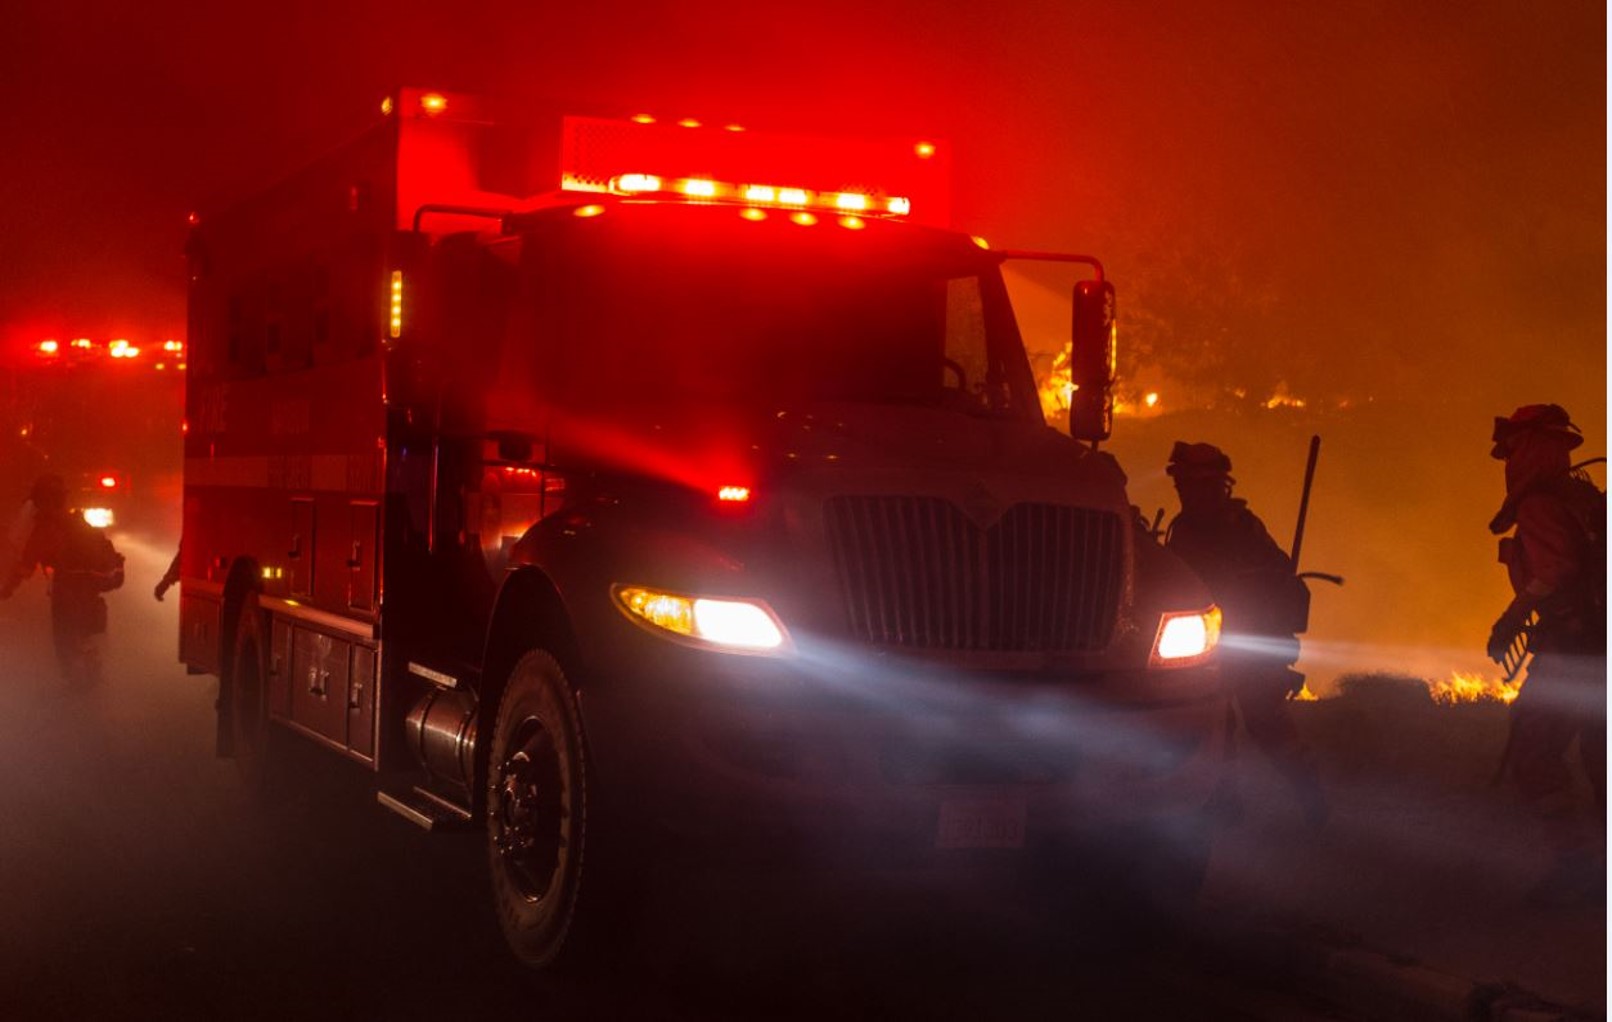 Fire engine at night with lights on and red glow behind.